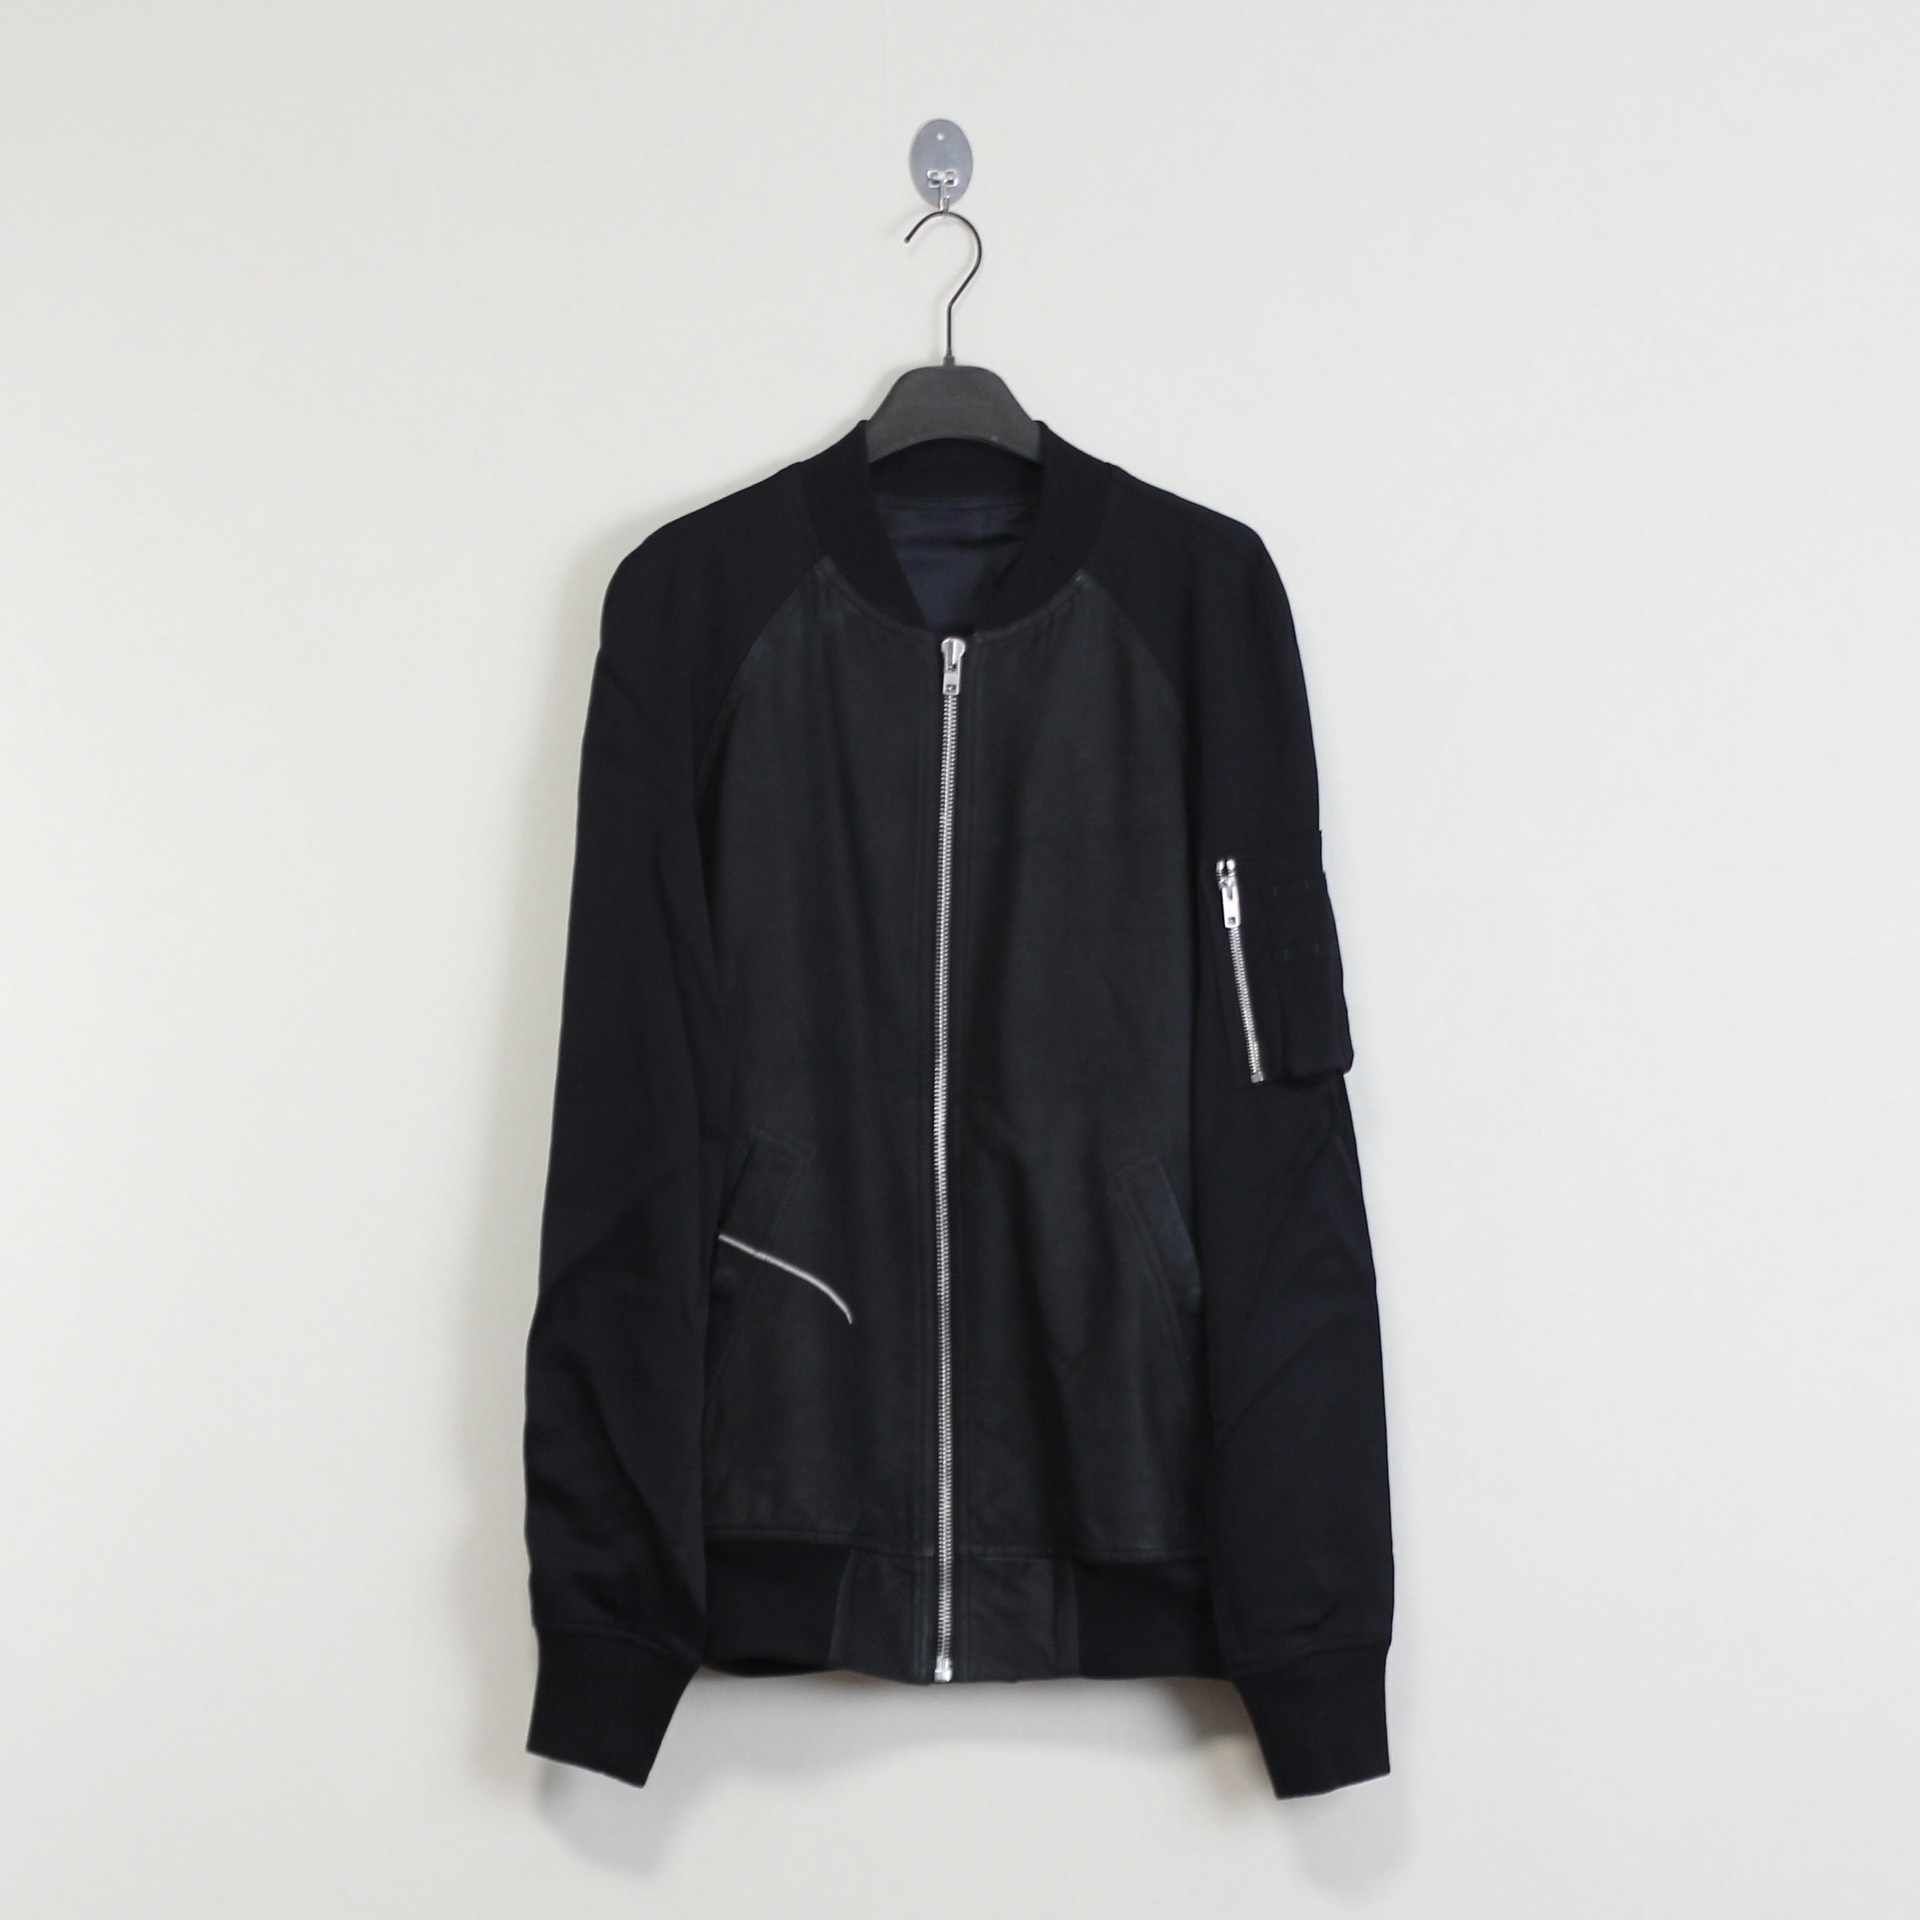 Rick Owens SS16 Lambskin Leather Bomber - 2